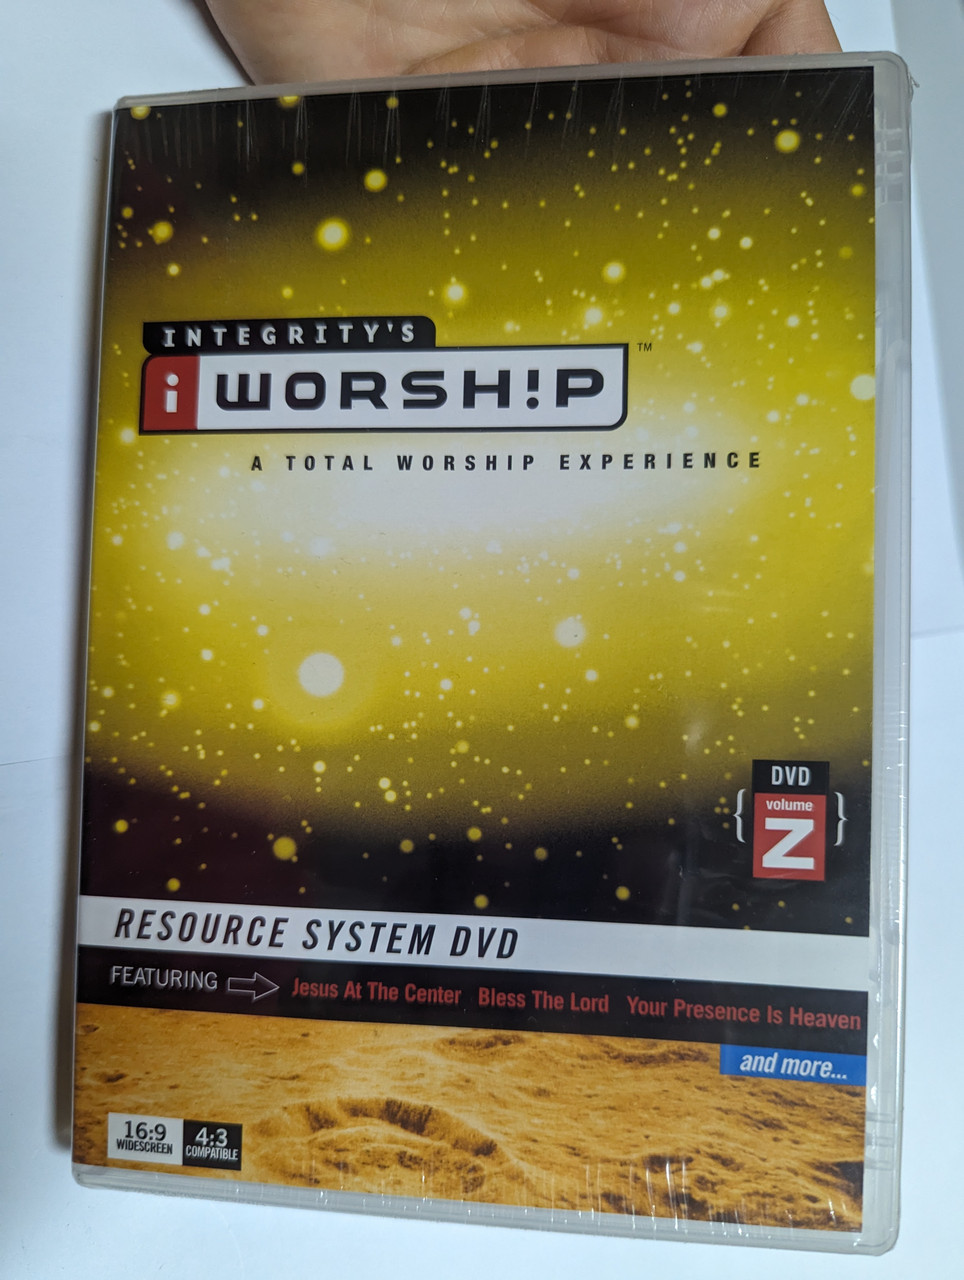 INTEGRITYS_iWORSHIP_A_TOTAL_WORSHIP_EXPERIENCE_DVD_Volume_Z_POWERFUL_FULL-LENGTH_SONG_MOVIES_DESIGNED_TO_ENHANCE_AND_ENLIVEN_ANY_WORSHIP_SERVICE_DVD_768514505__52634.1697949621.1280.1280.jpg (964×1280)